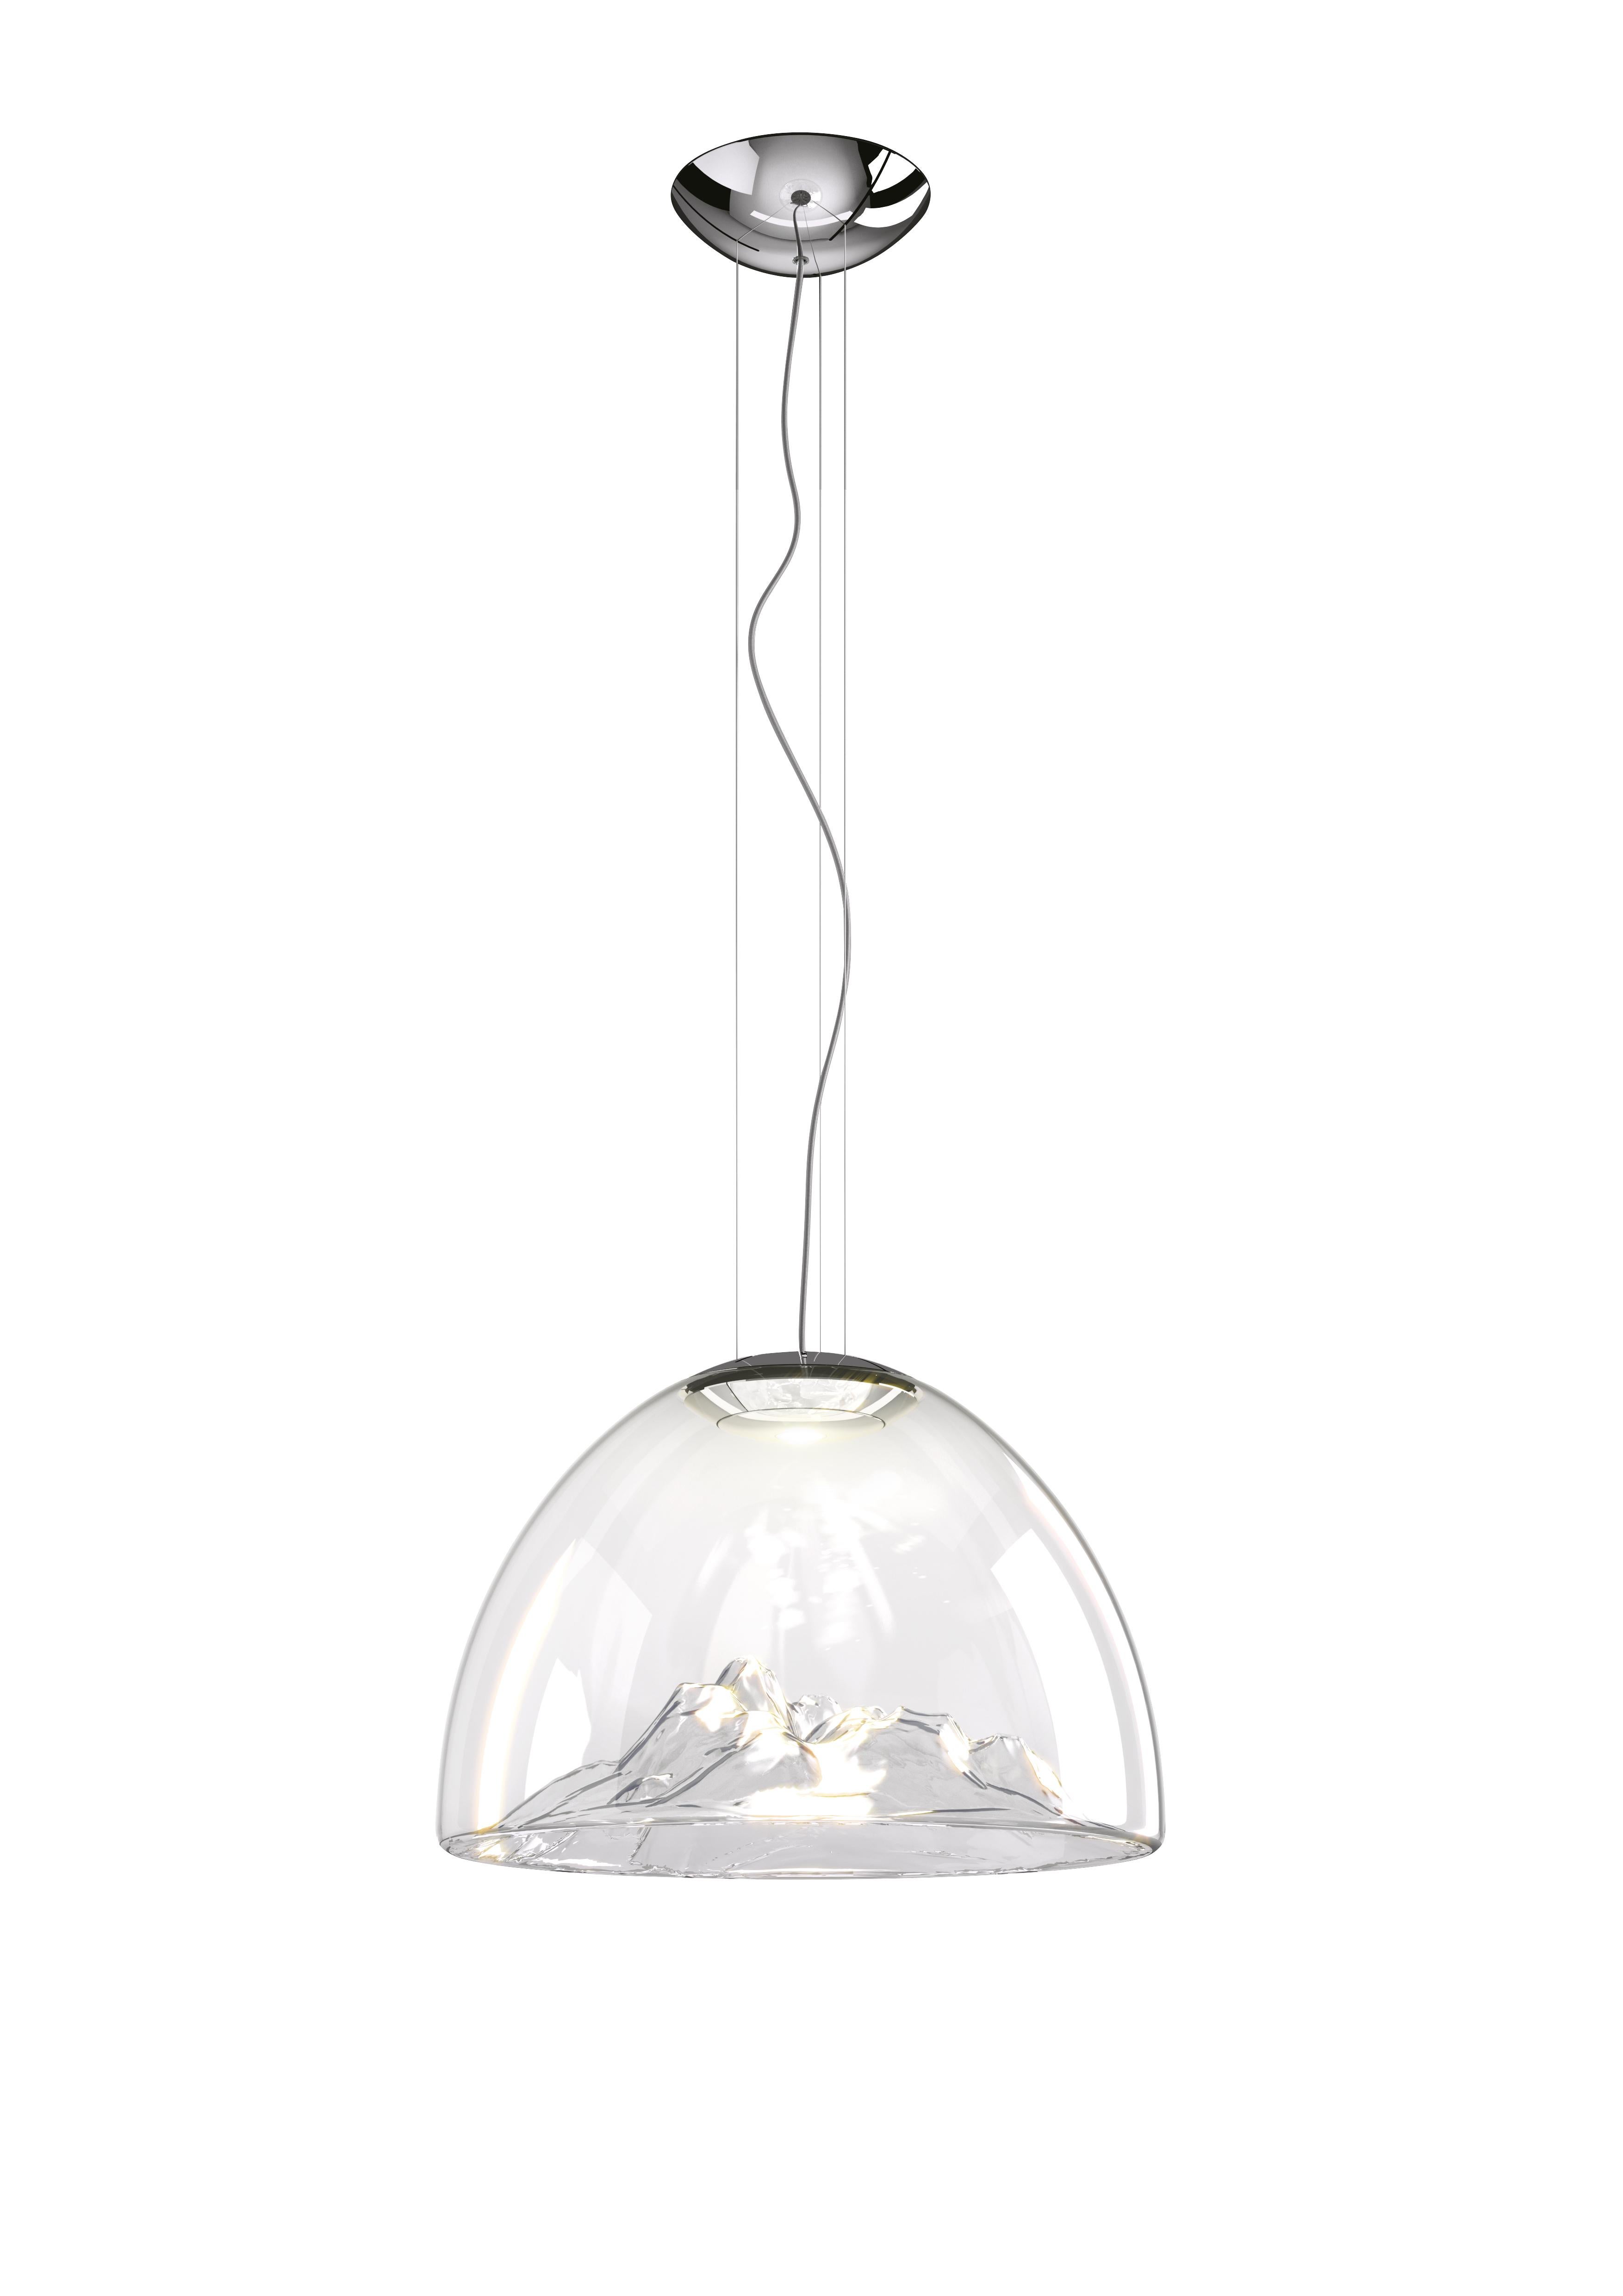 Axolight Suspension Mountain View Crystal Cromo Glass Diffuser by Dima Loginoff